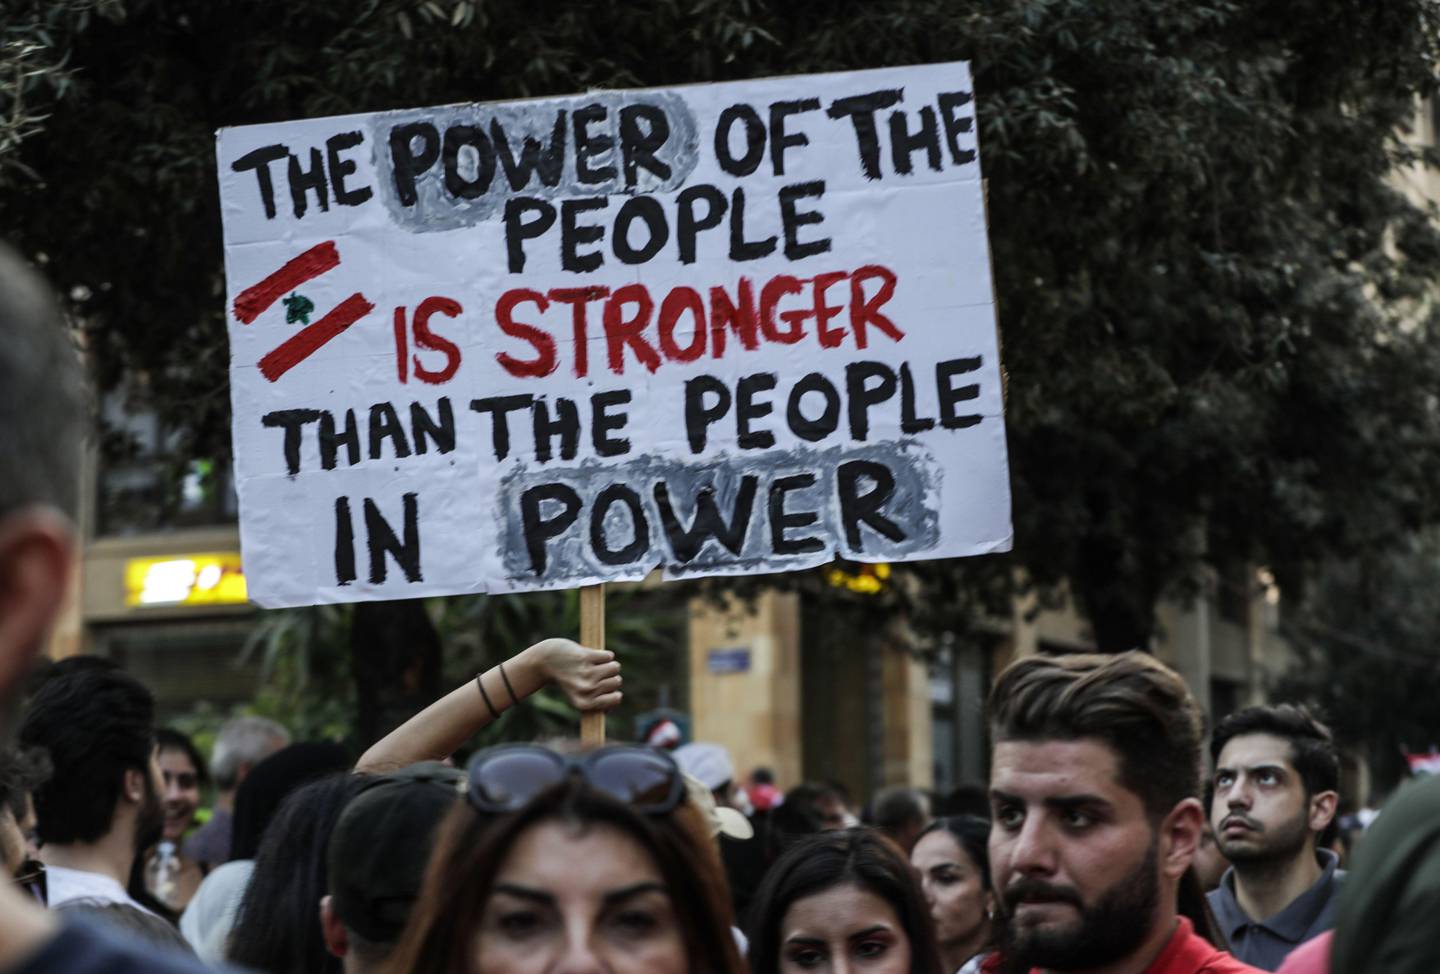 Lebanese demonstrators carry a placard as they take part in a rally in the capital Beirut's downtown district on October 20, 2019. - Thousands continued to rally despite calls for calm from politicians and dozens of arrests. The demonstrators are demanding a sweeping overhaul of Lebanon's political system, citing grievances ranging from austerity measures to poor infrastructure. (Photo by Anwar AMRO / AFP)